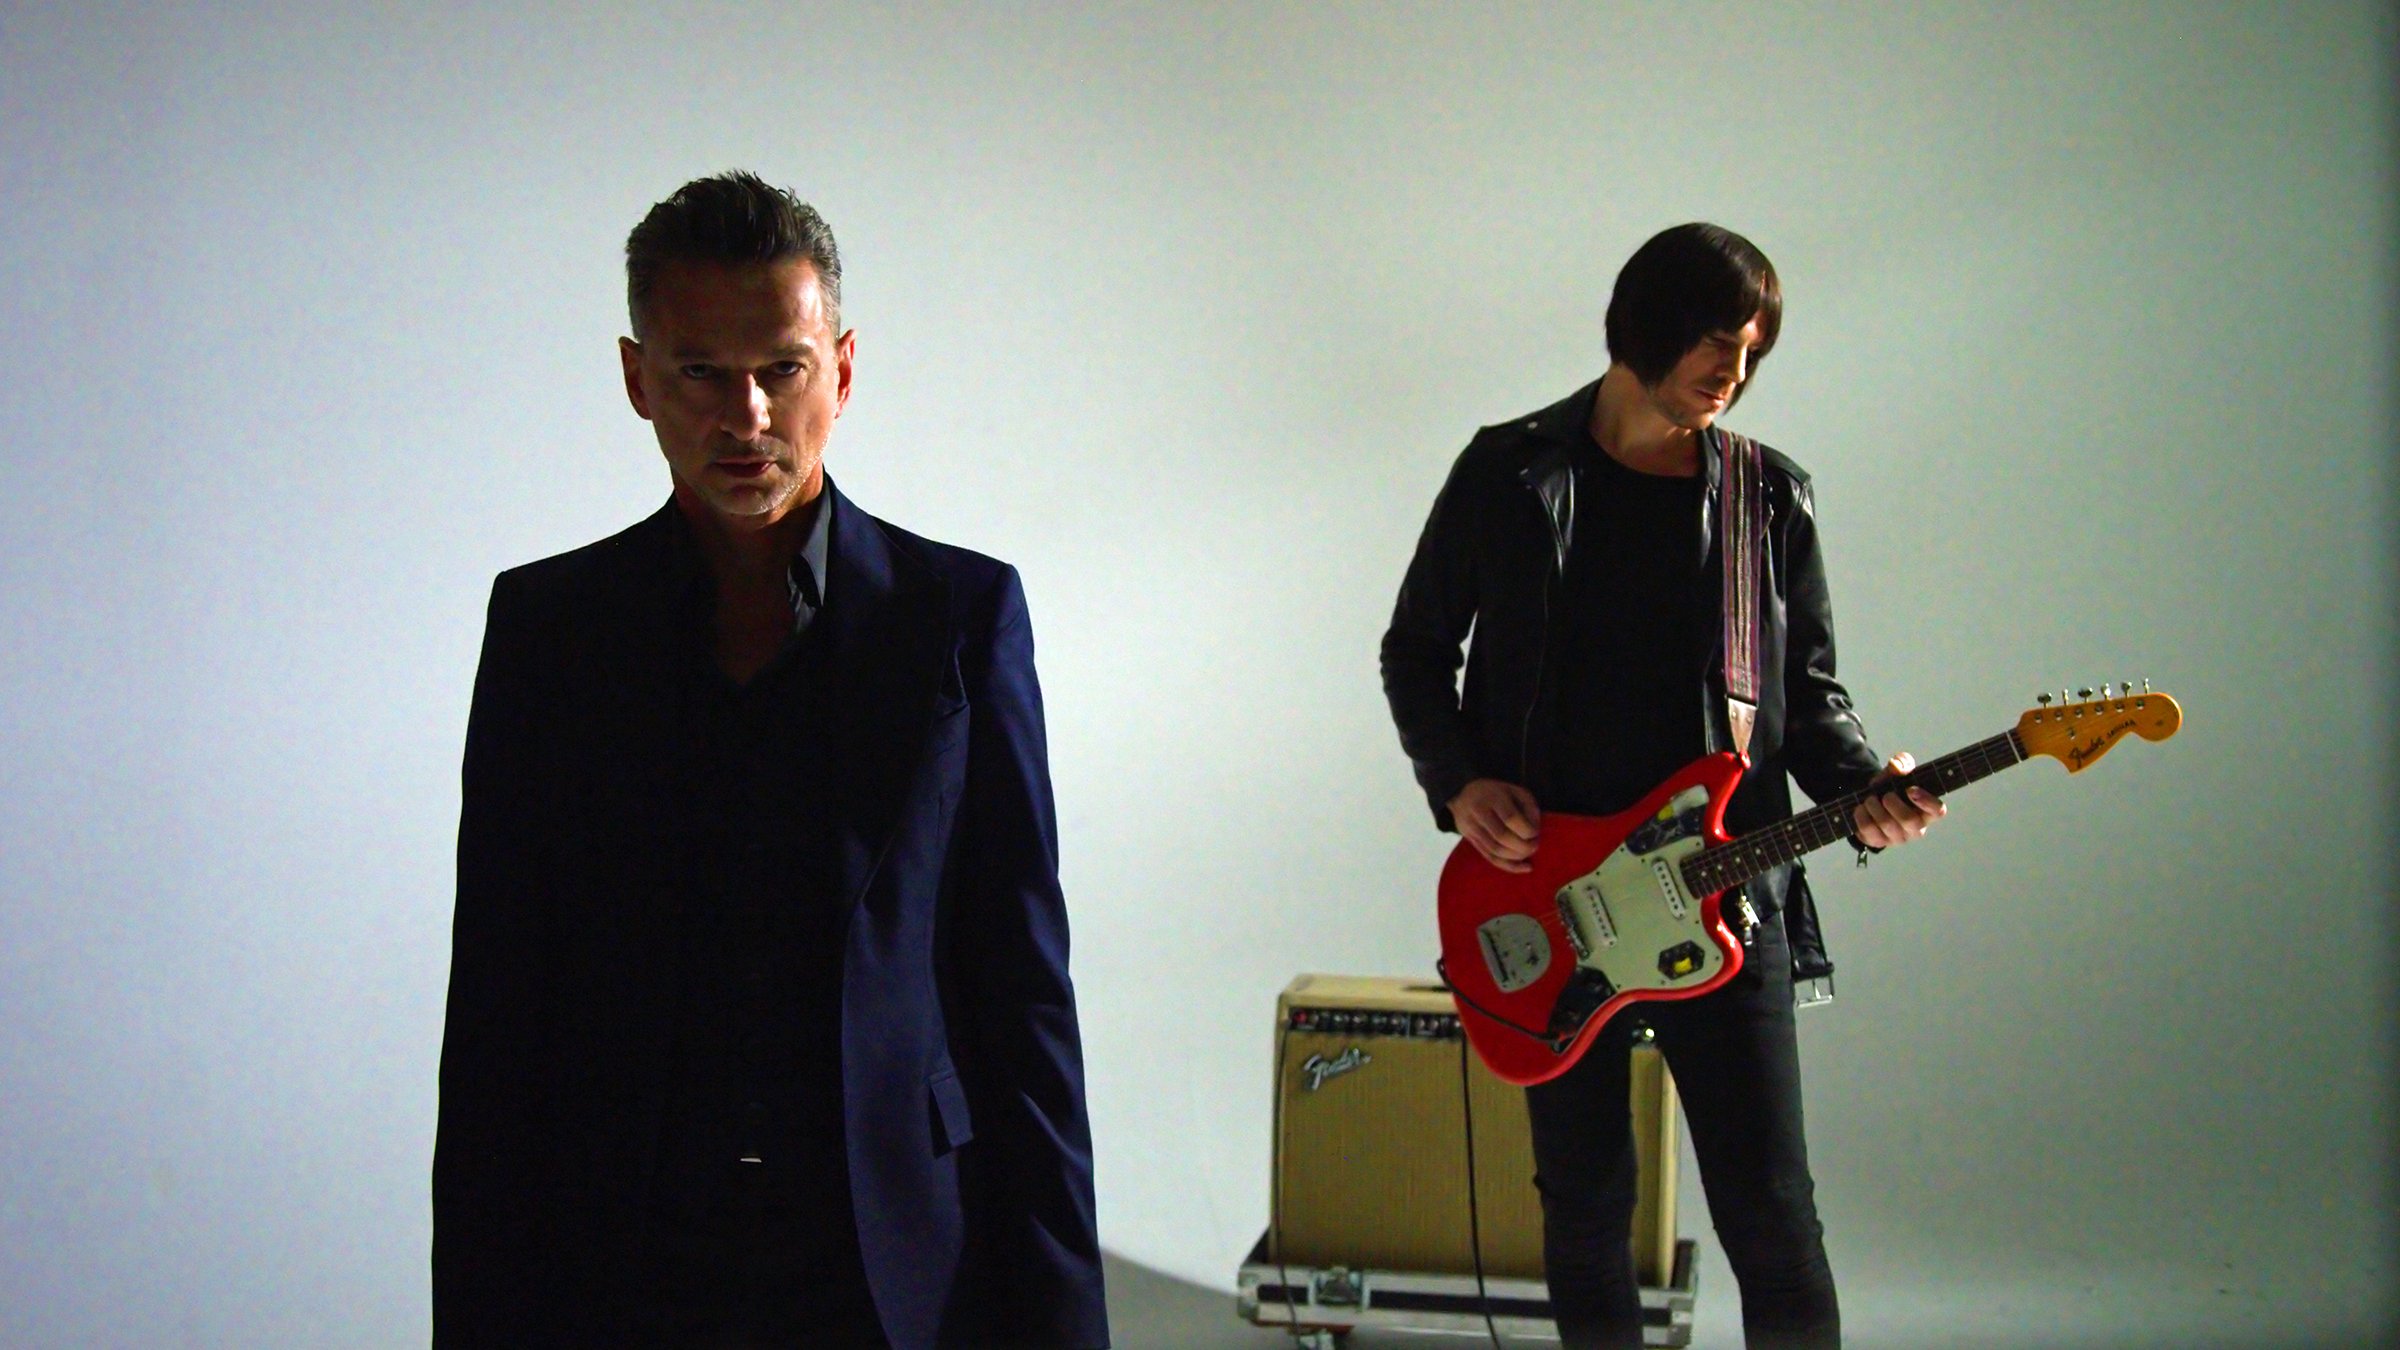 Depeche Mode's DAVE GAHAN joins HUMANIST for new single 'Shock Collar' - Watch Video 2